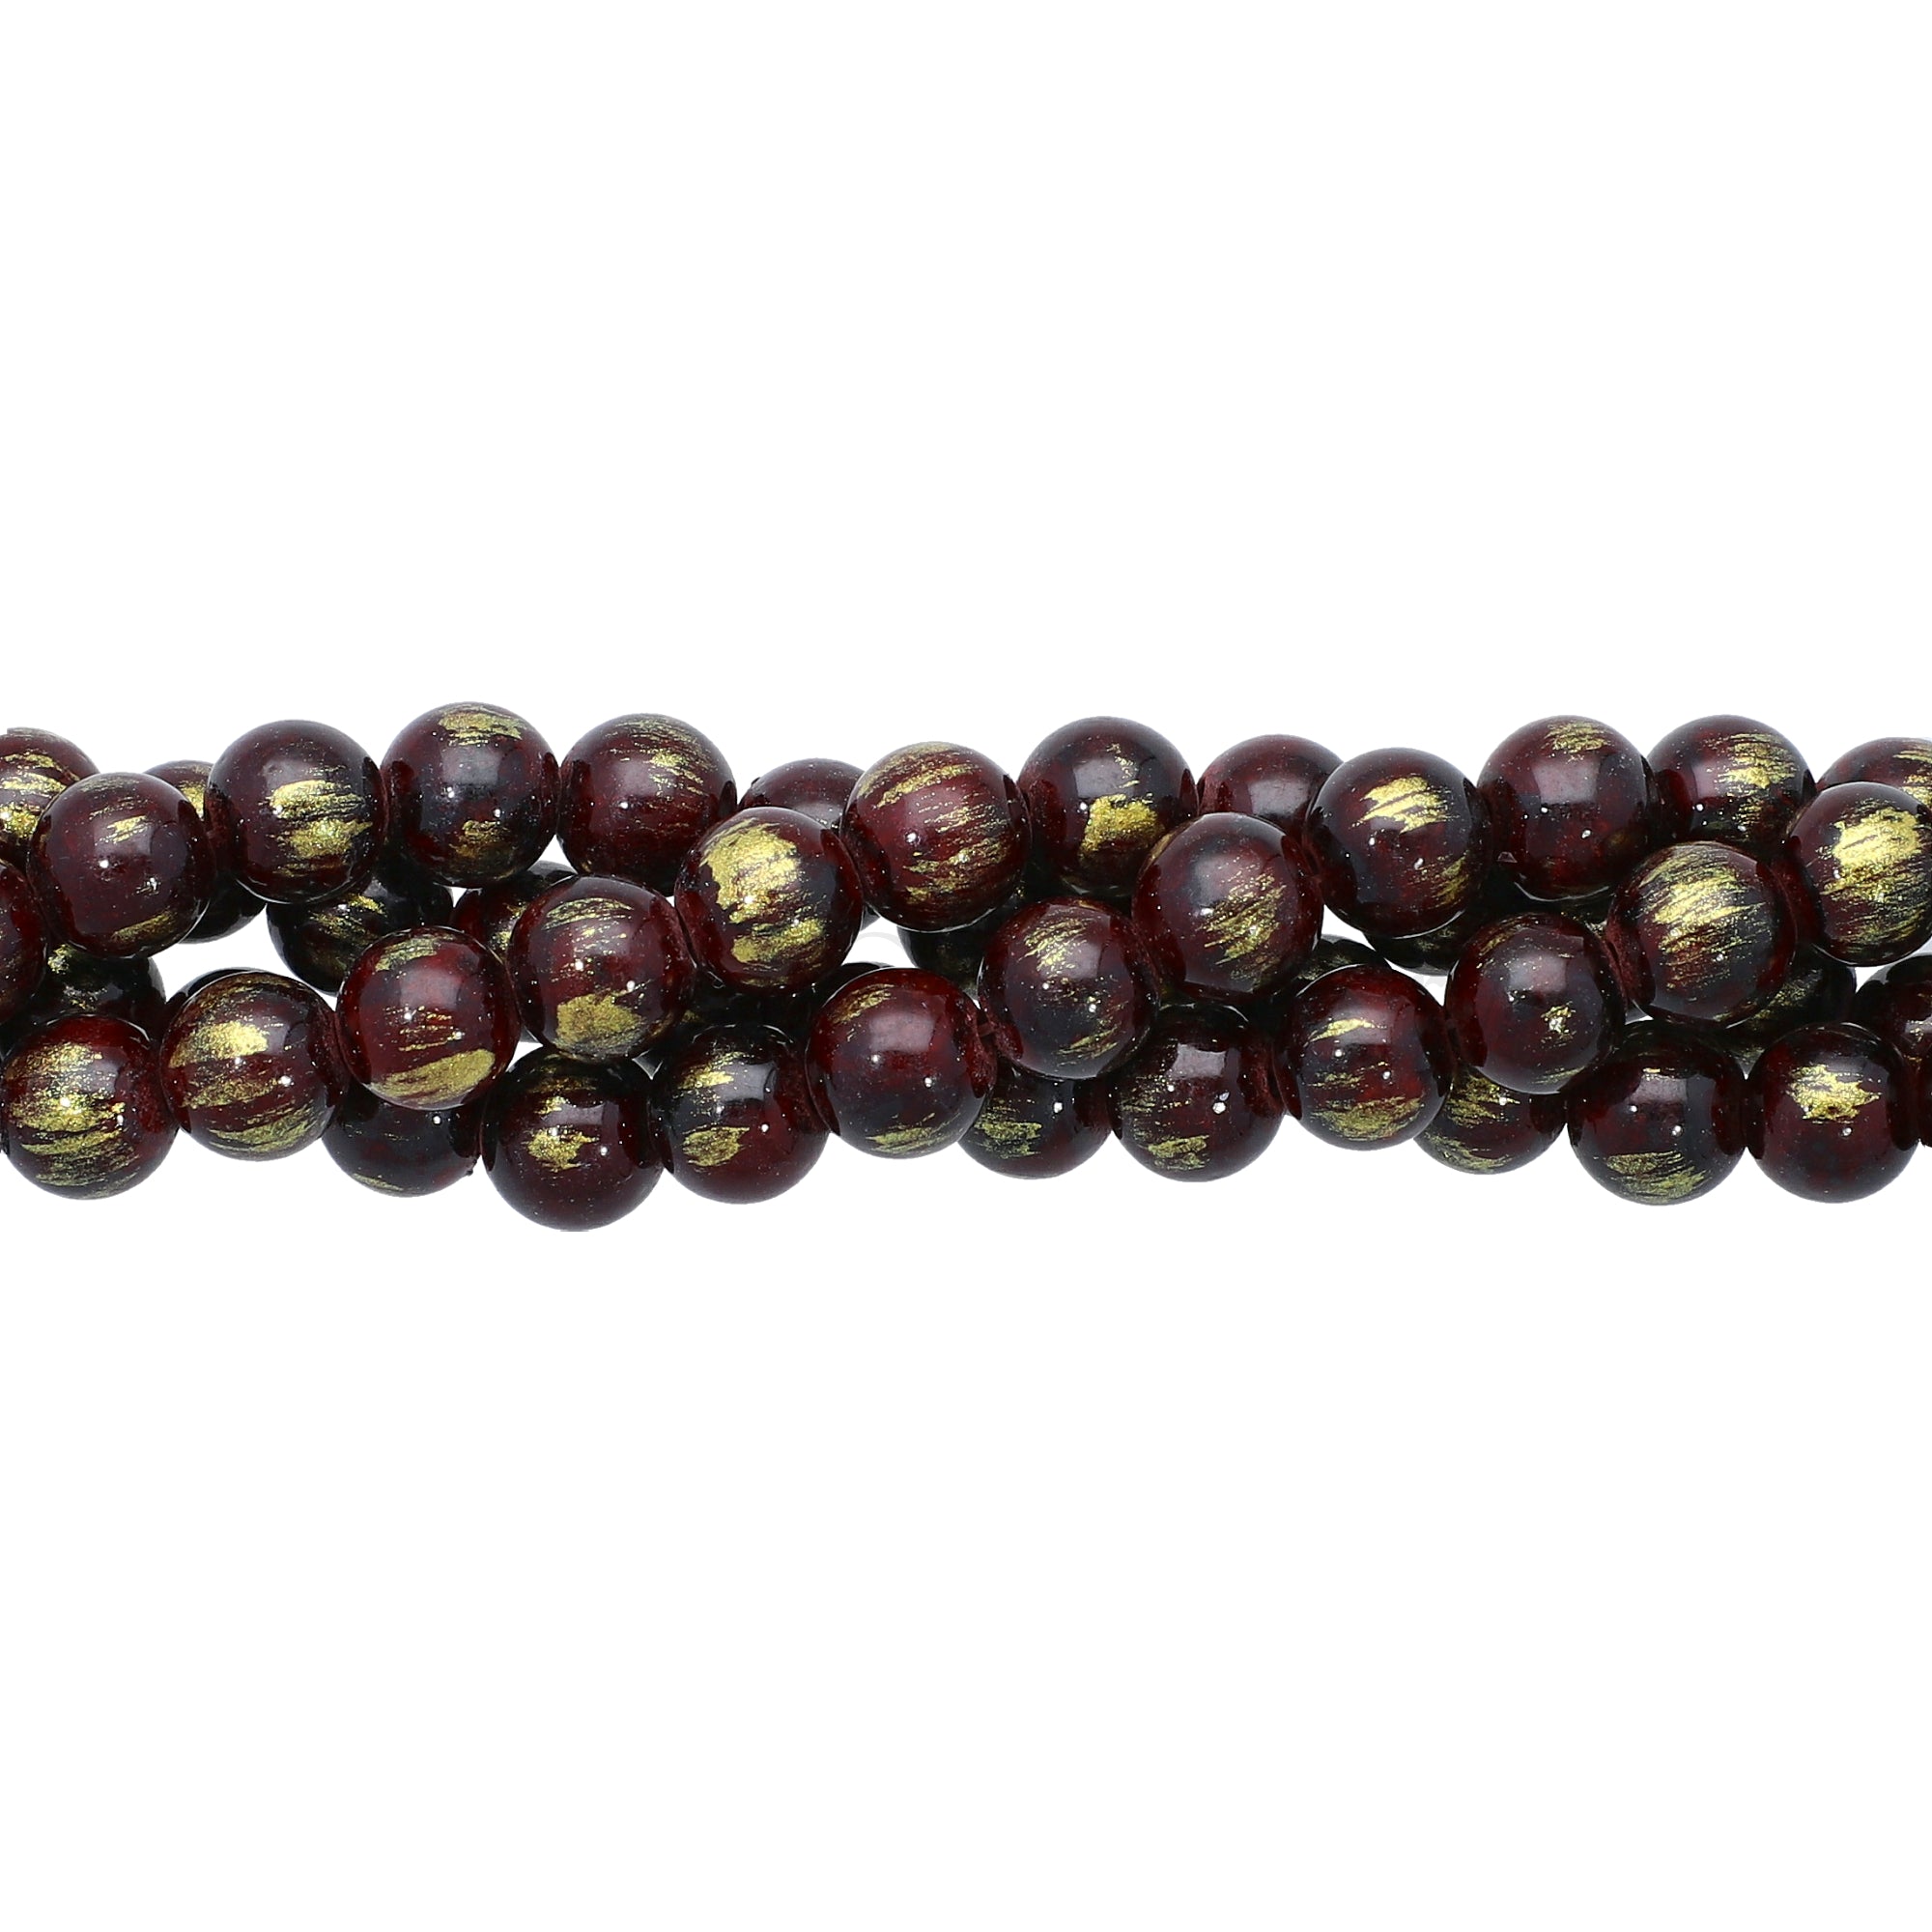 8 MM Gold Leafed Dyed Maroon Jade Smooth Round Beads 15 Inches Strand